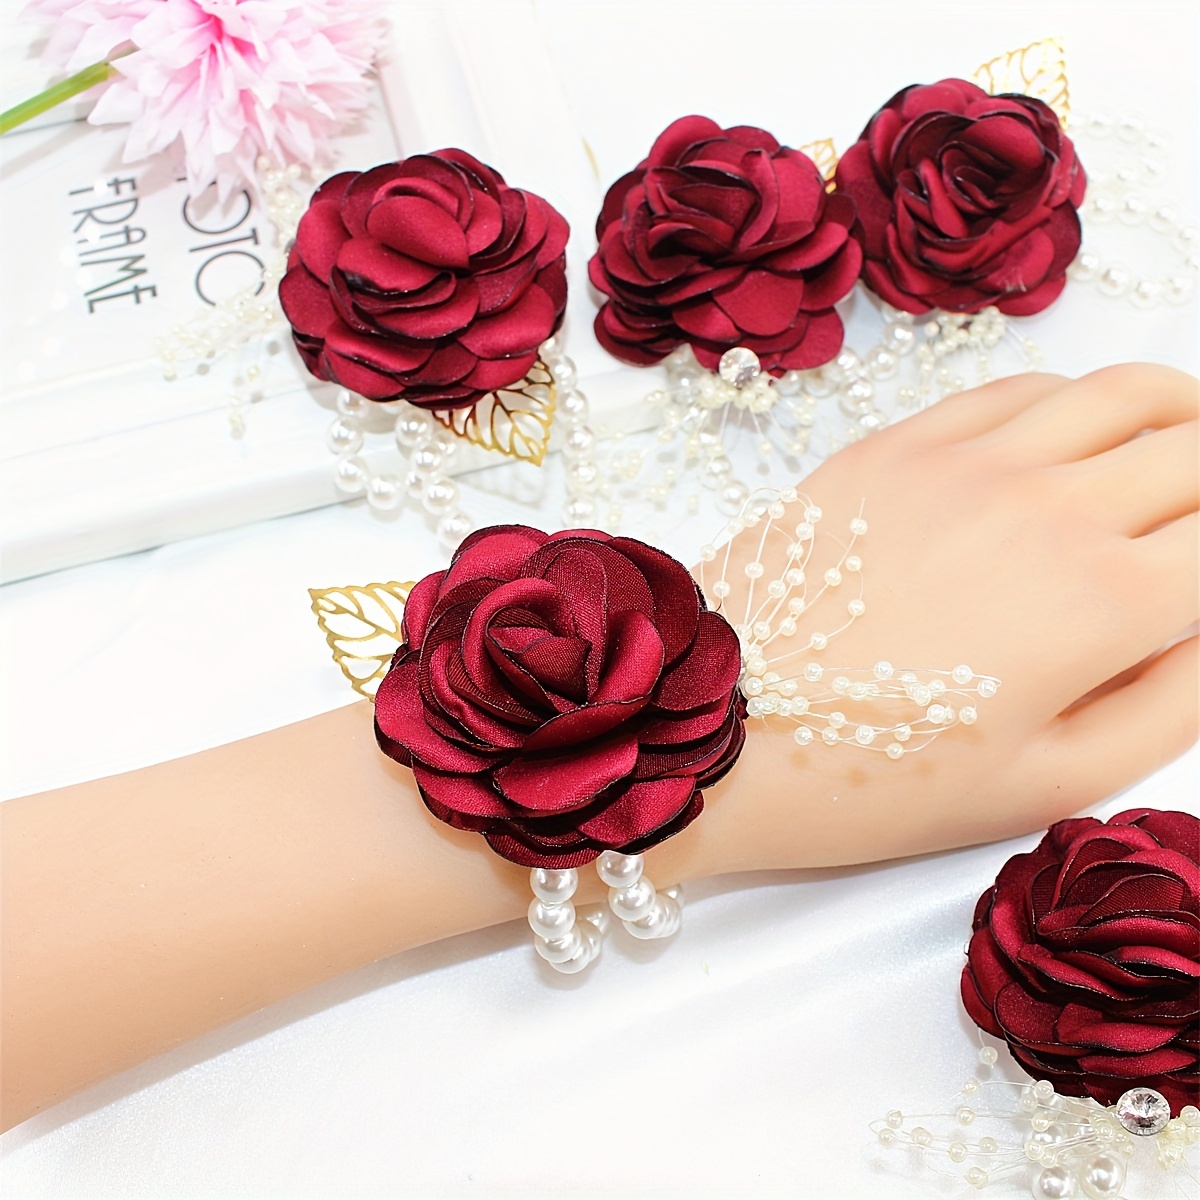 Wrist Corsages For Wedding - 2 Pieces Bridesmaid Silk Wrist Flower Bridal  Corsage Wedding Ceremony D(free Shipping)